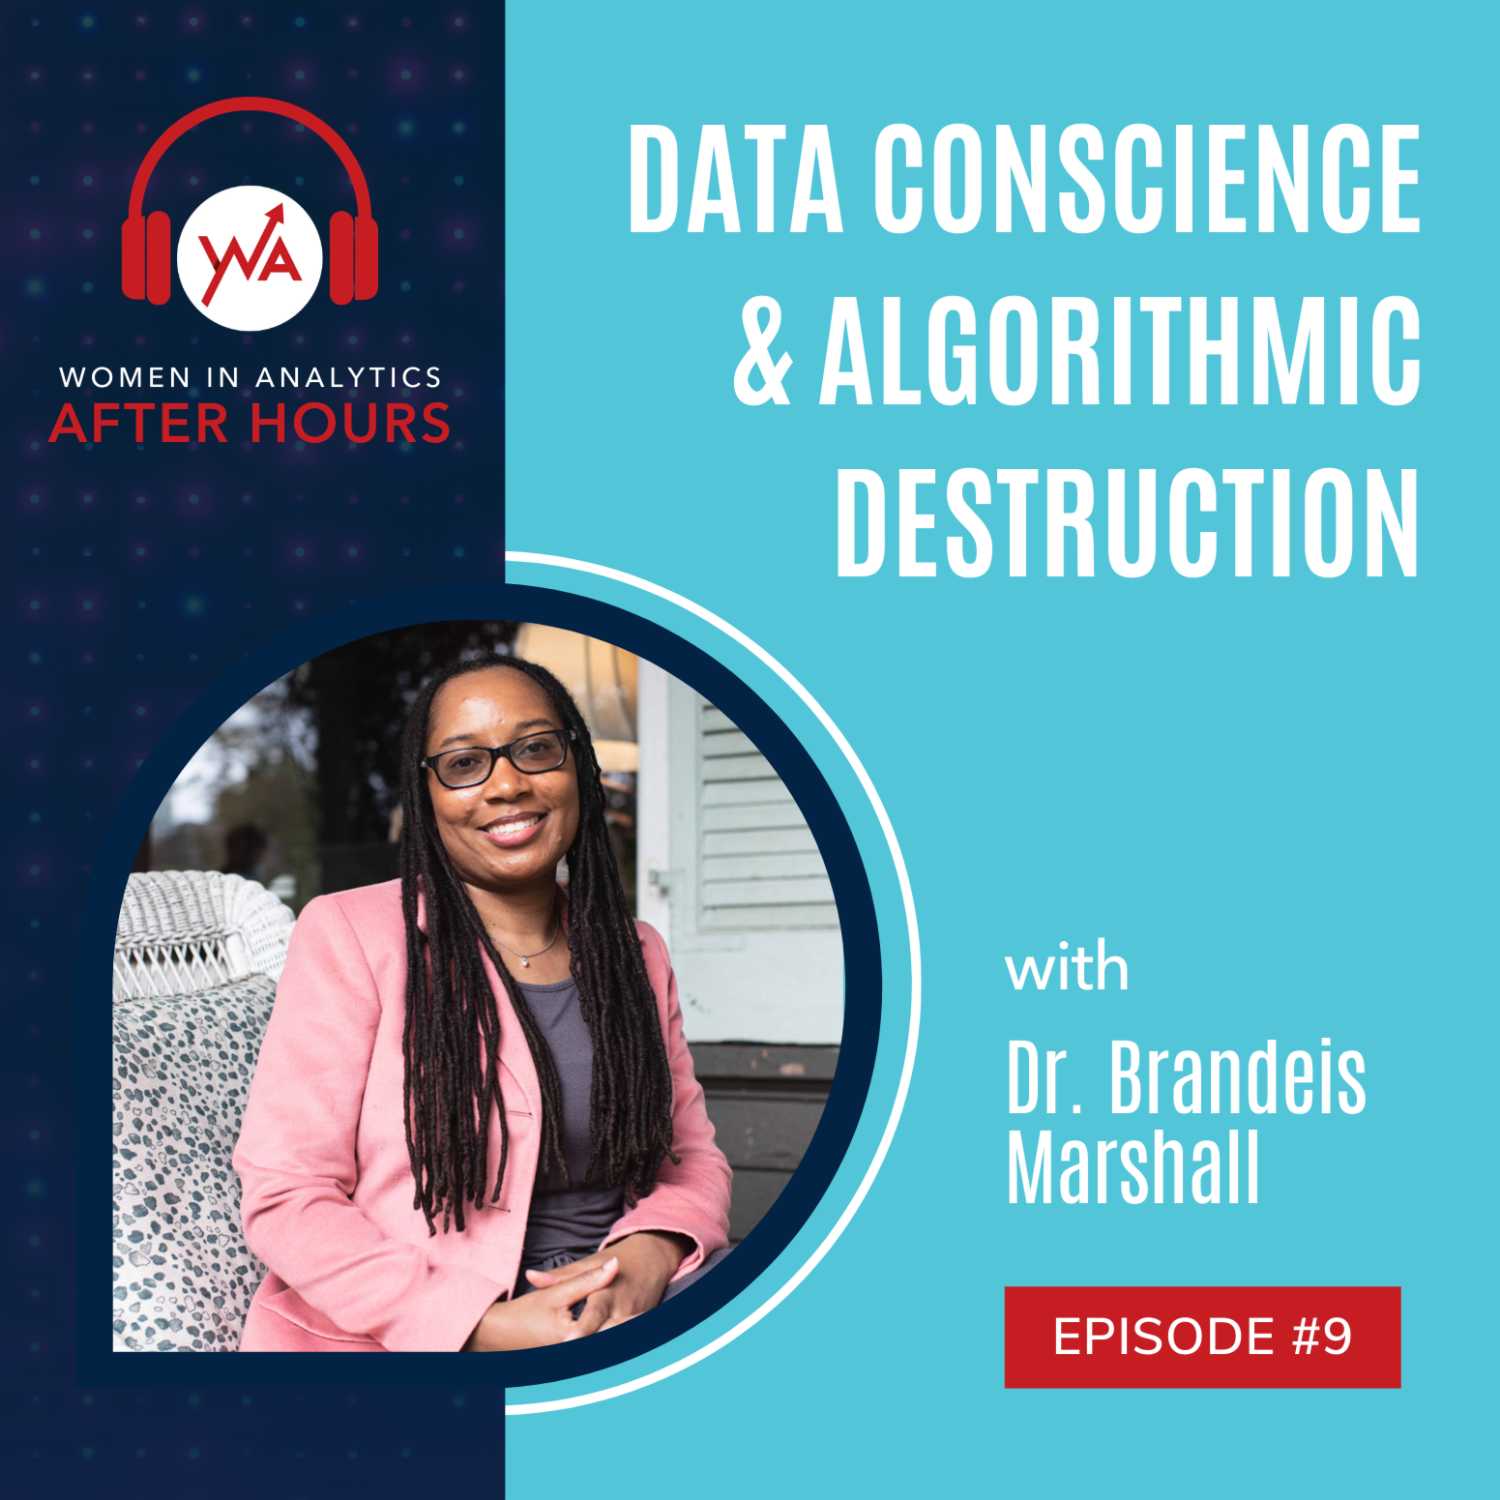 Episode 9 - Data Conscience and Algorithmic Destruction with Dr. Brandeis Marshall